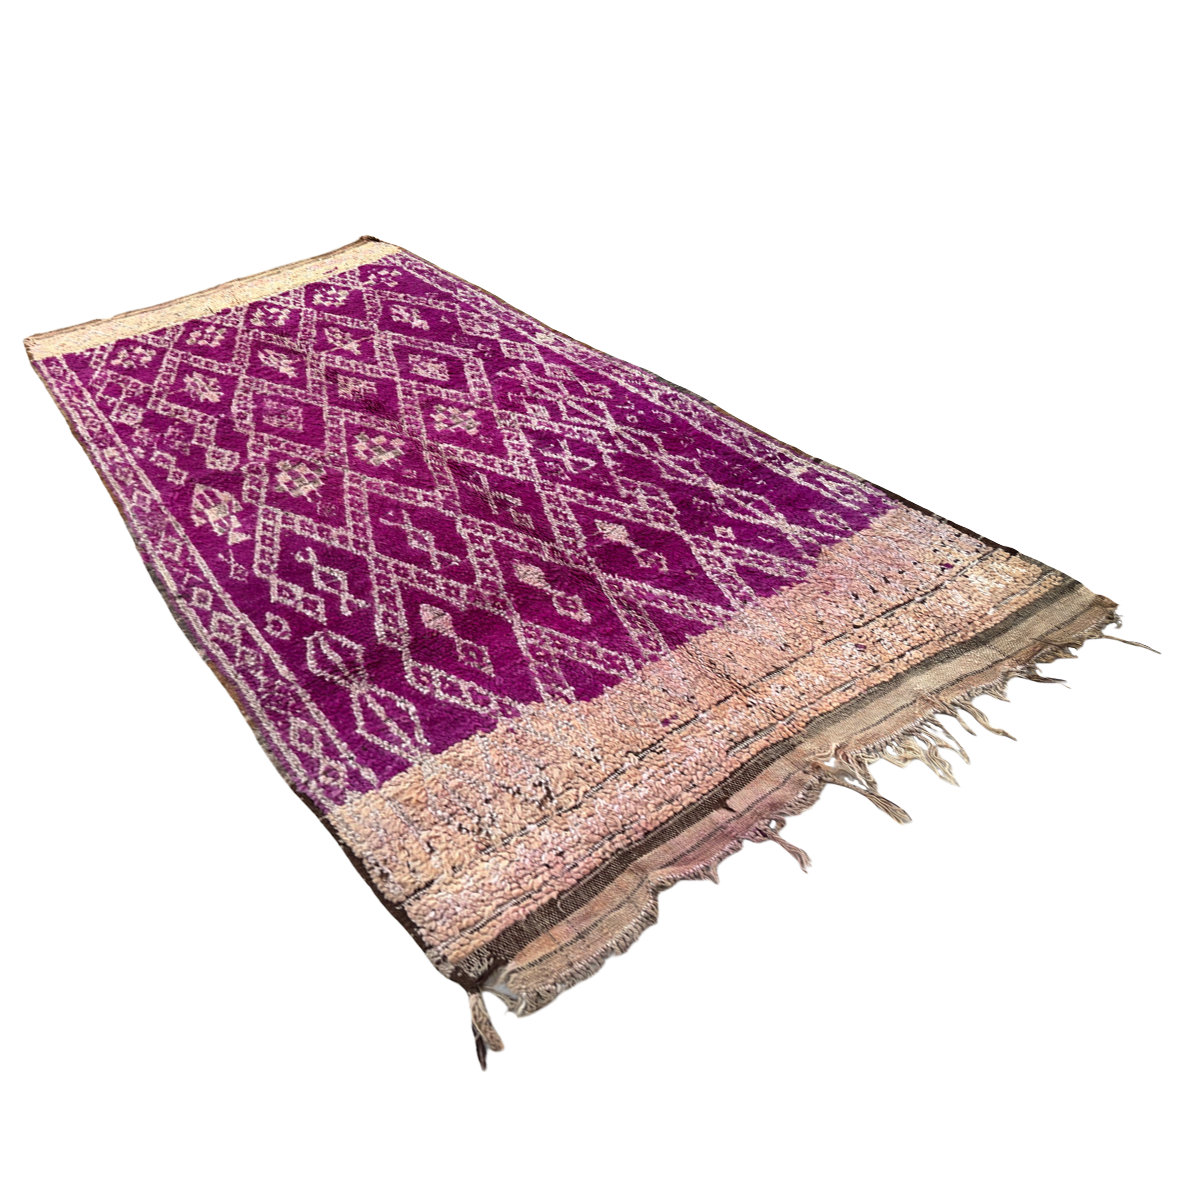 Direct Moroccan Rugs